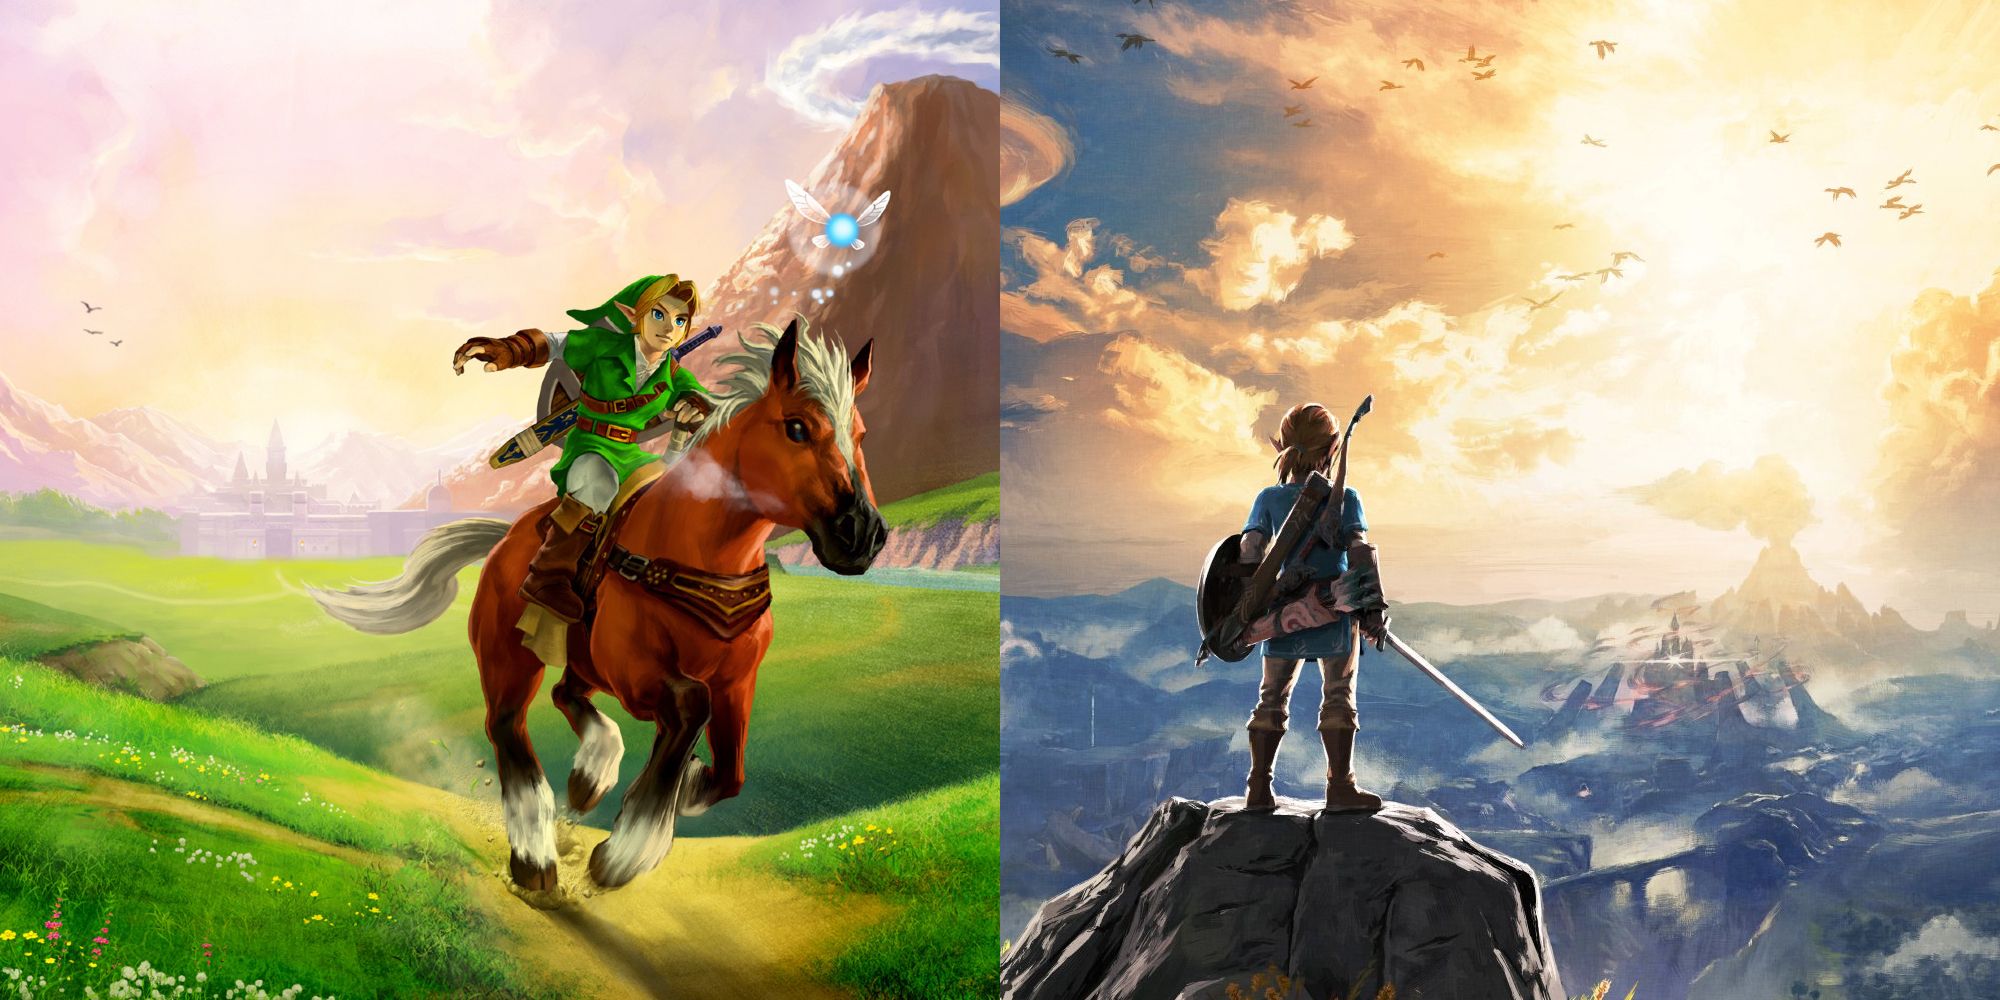 Promotional artworks for The Legend of Zelda: Ocarina of Time and Breath of the Wild.